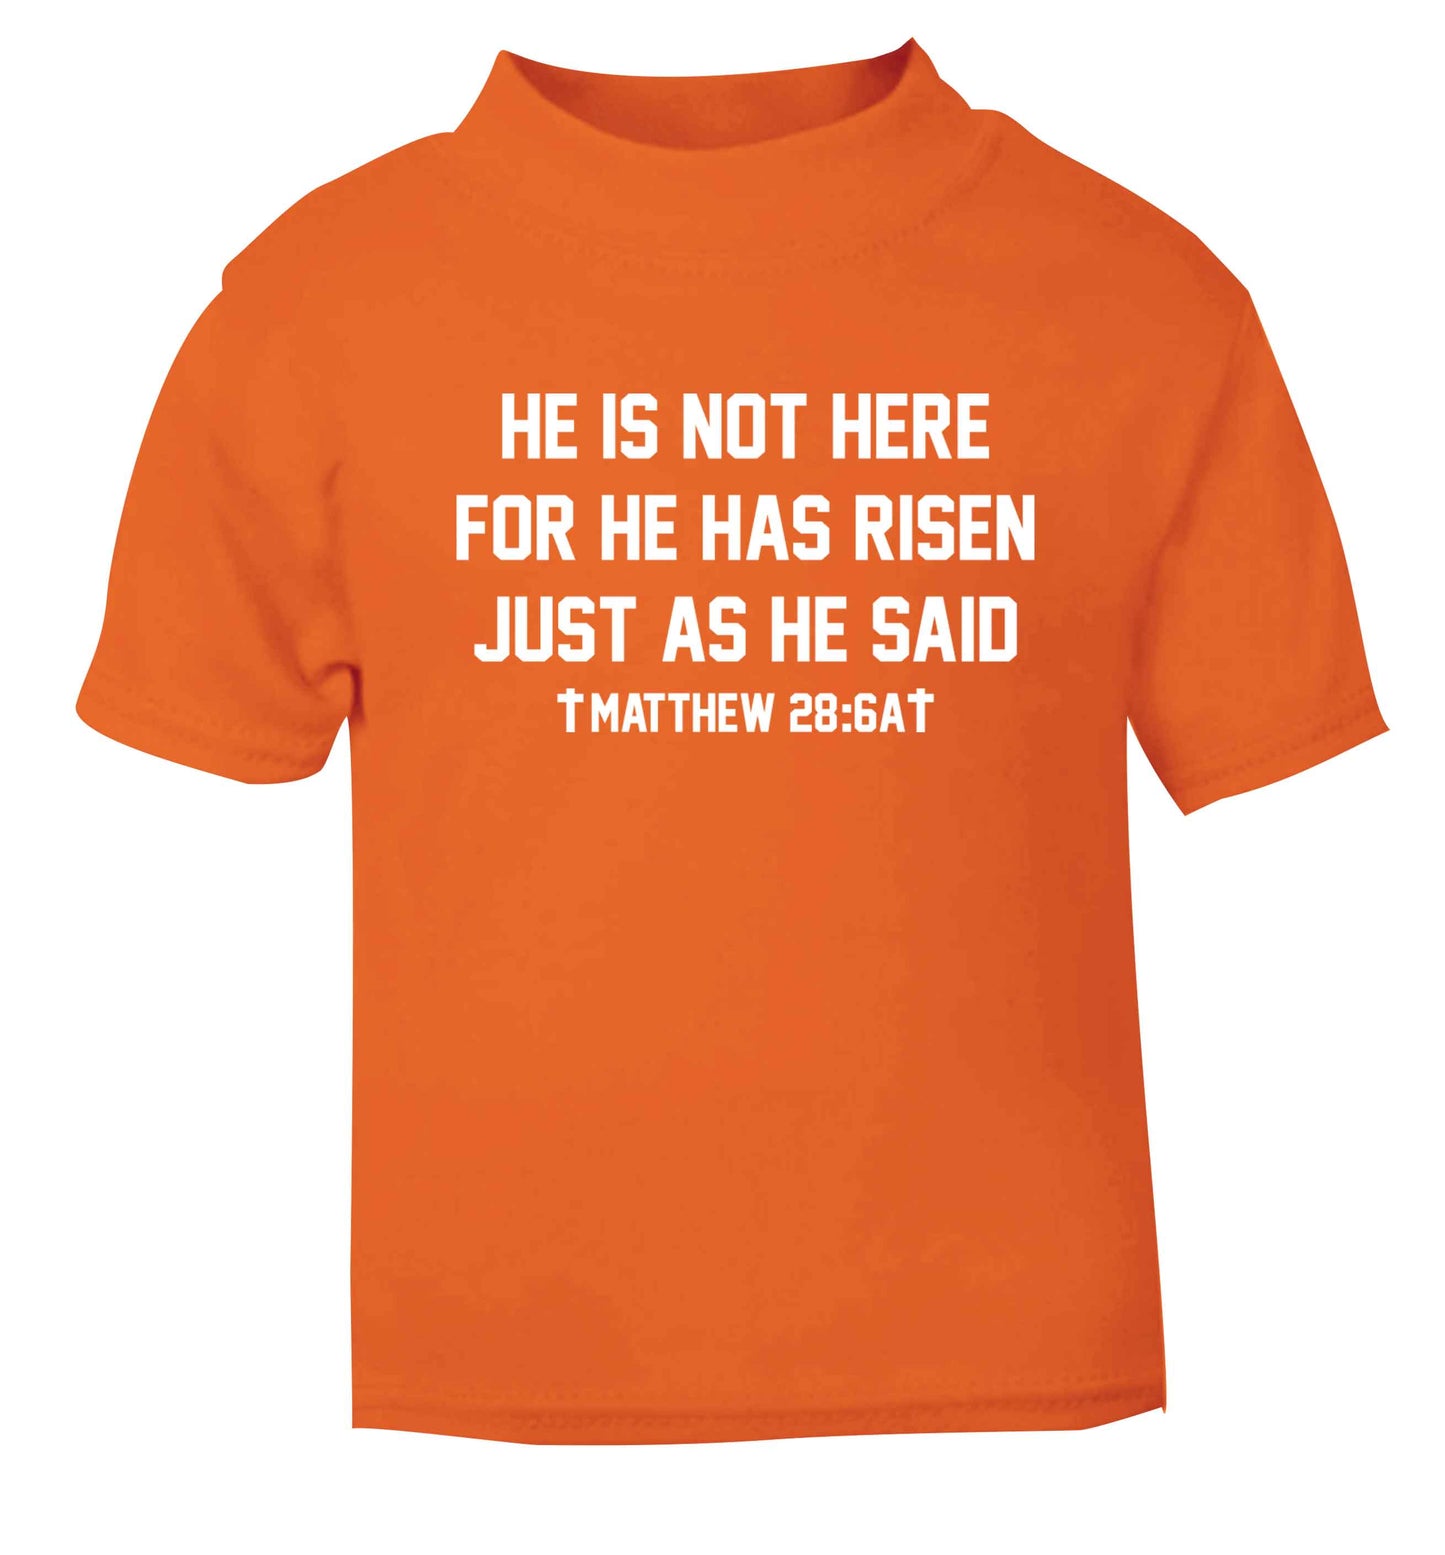 He is not here for he has risen just as he said matthew 28:6A orange baby toddler Tshirt 2 Years